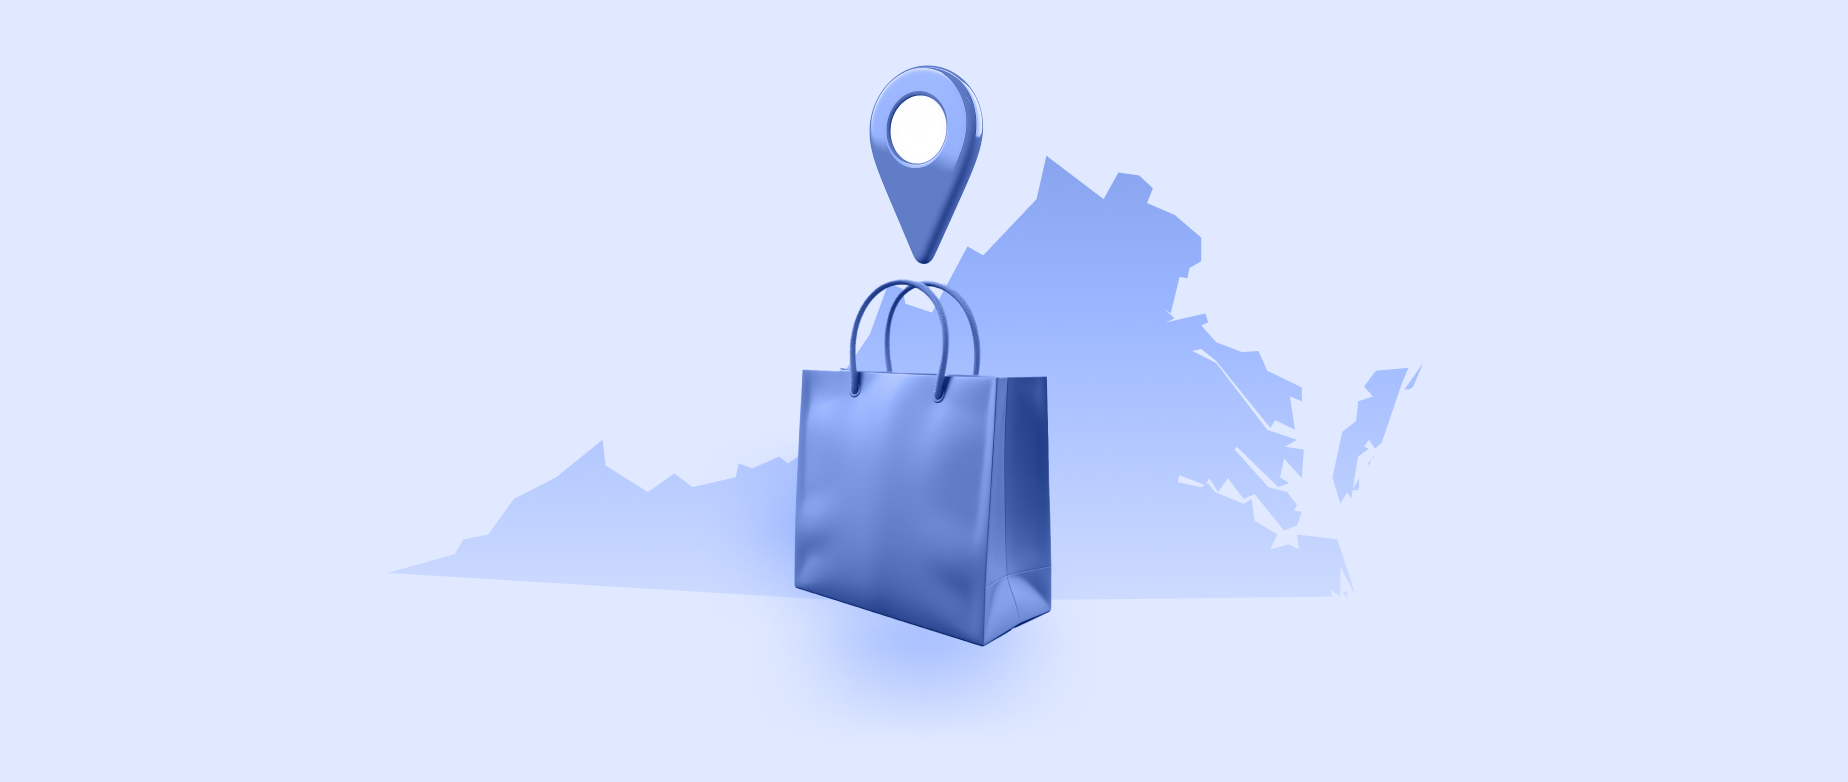 A blue outline of the state of Virginia with a shopping bag and location icon on a light blue background.